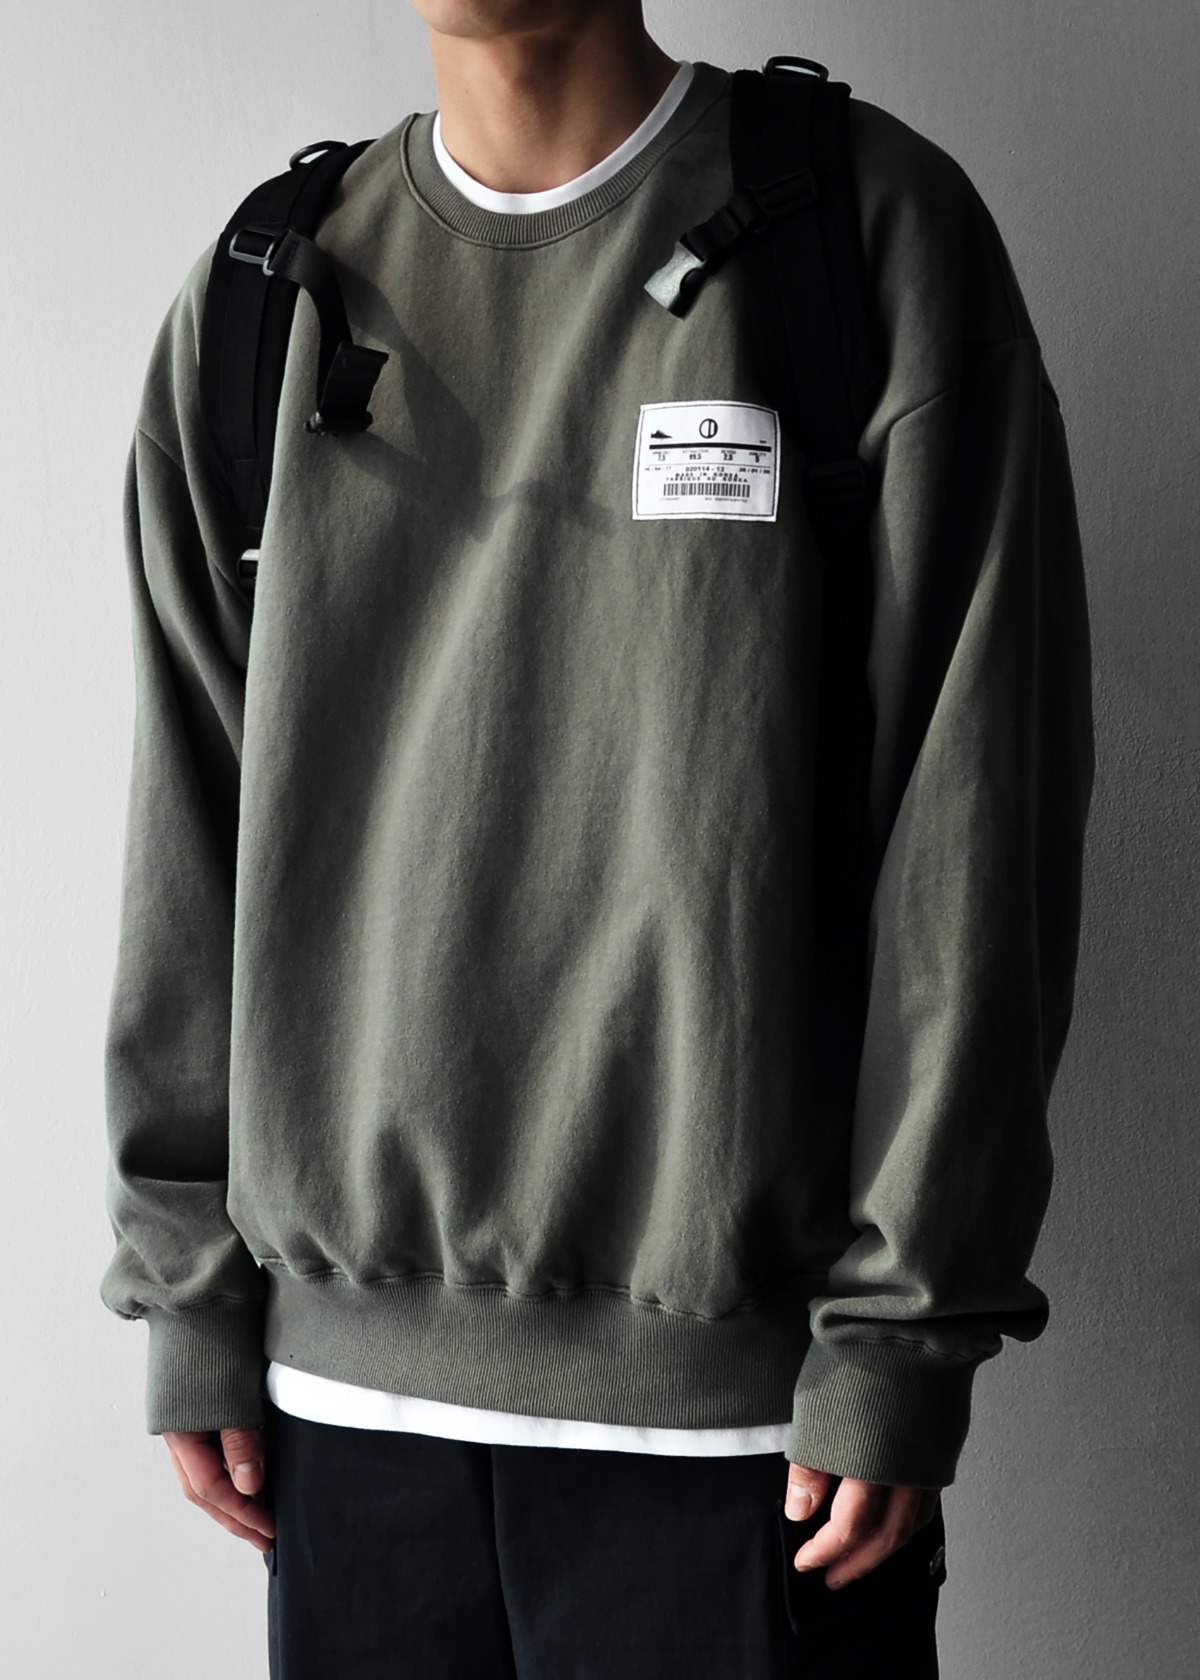 SDDL SHOES LABEL PATCH DT SWEAT SHIRT #2(2차 재입고)